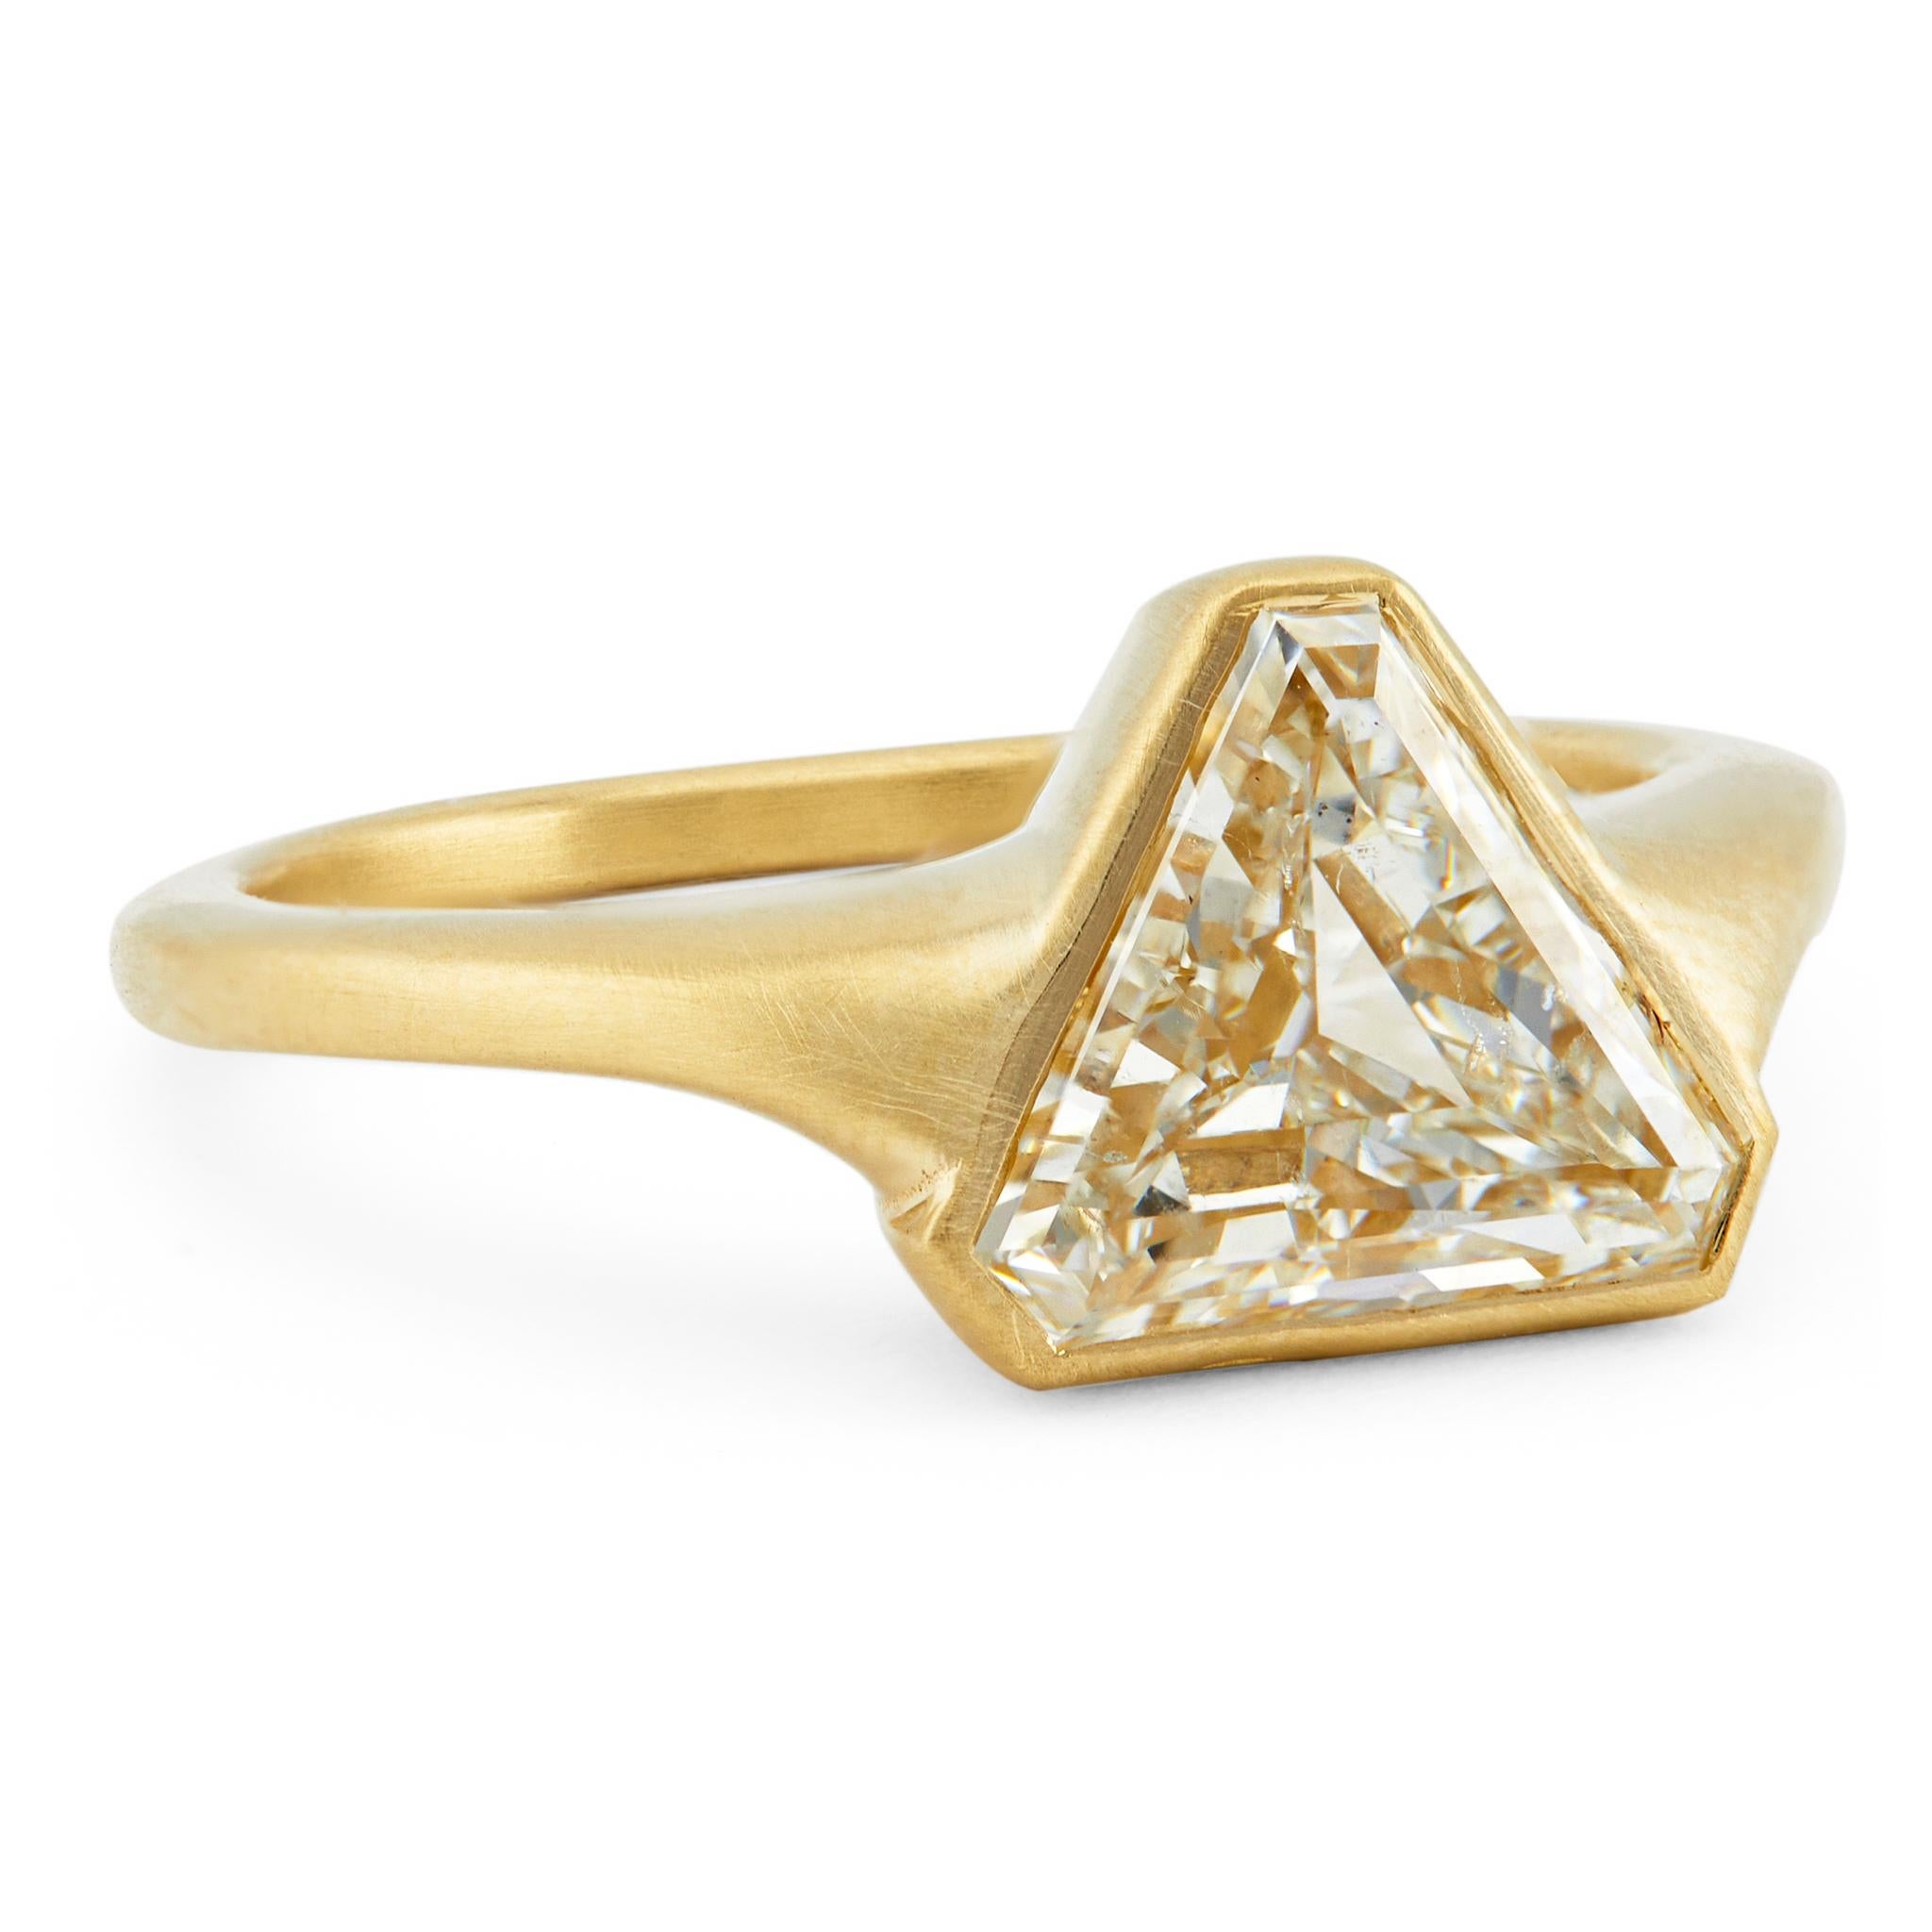 Women's or Men's GIA 3.02 Triangle Step Cut Diamond 18k Yellow Gold Solitaire Ring